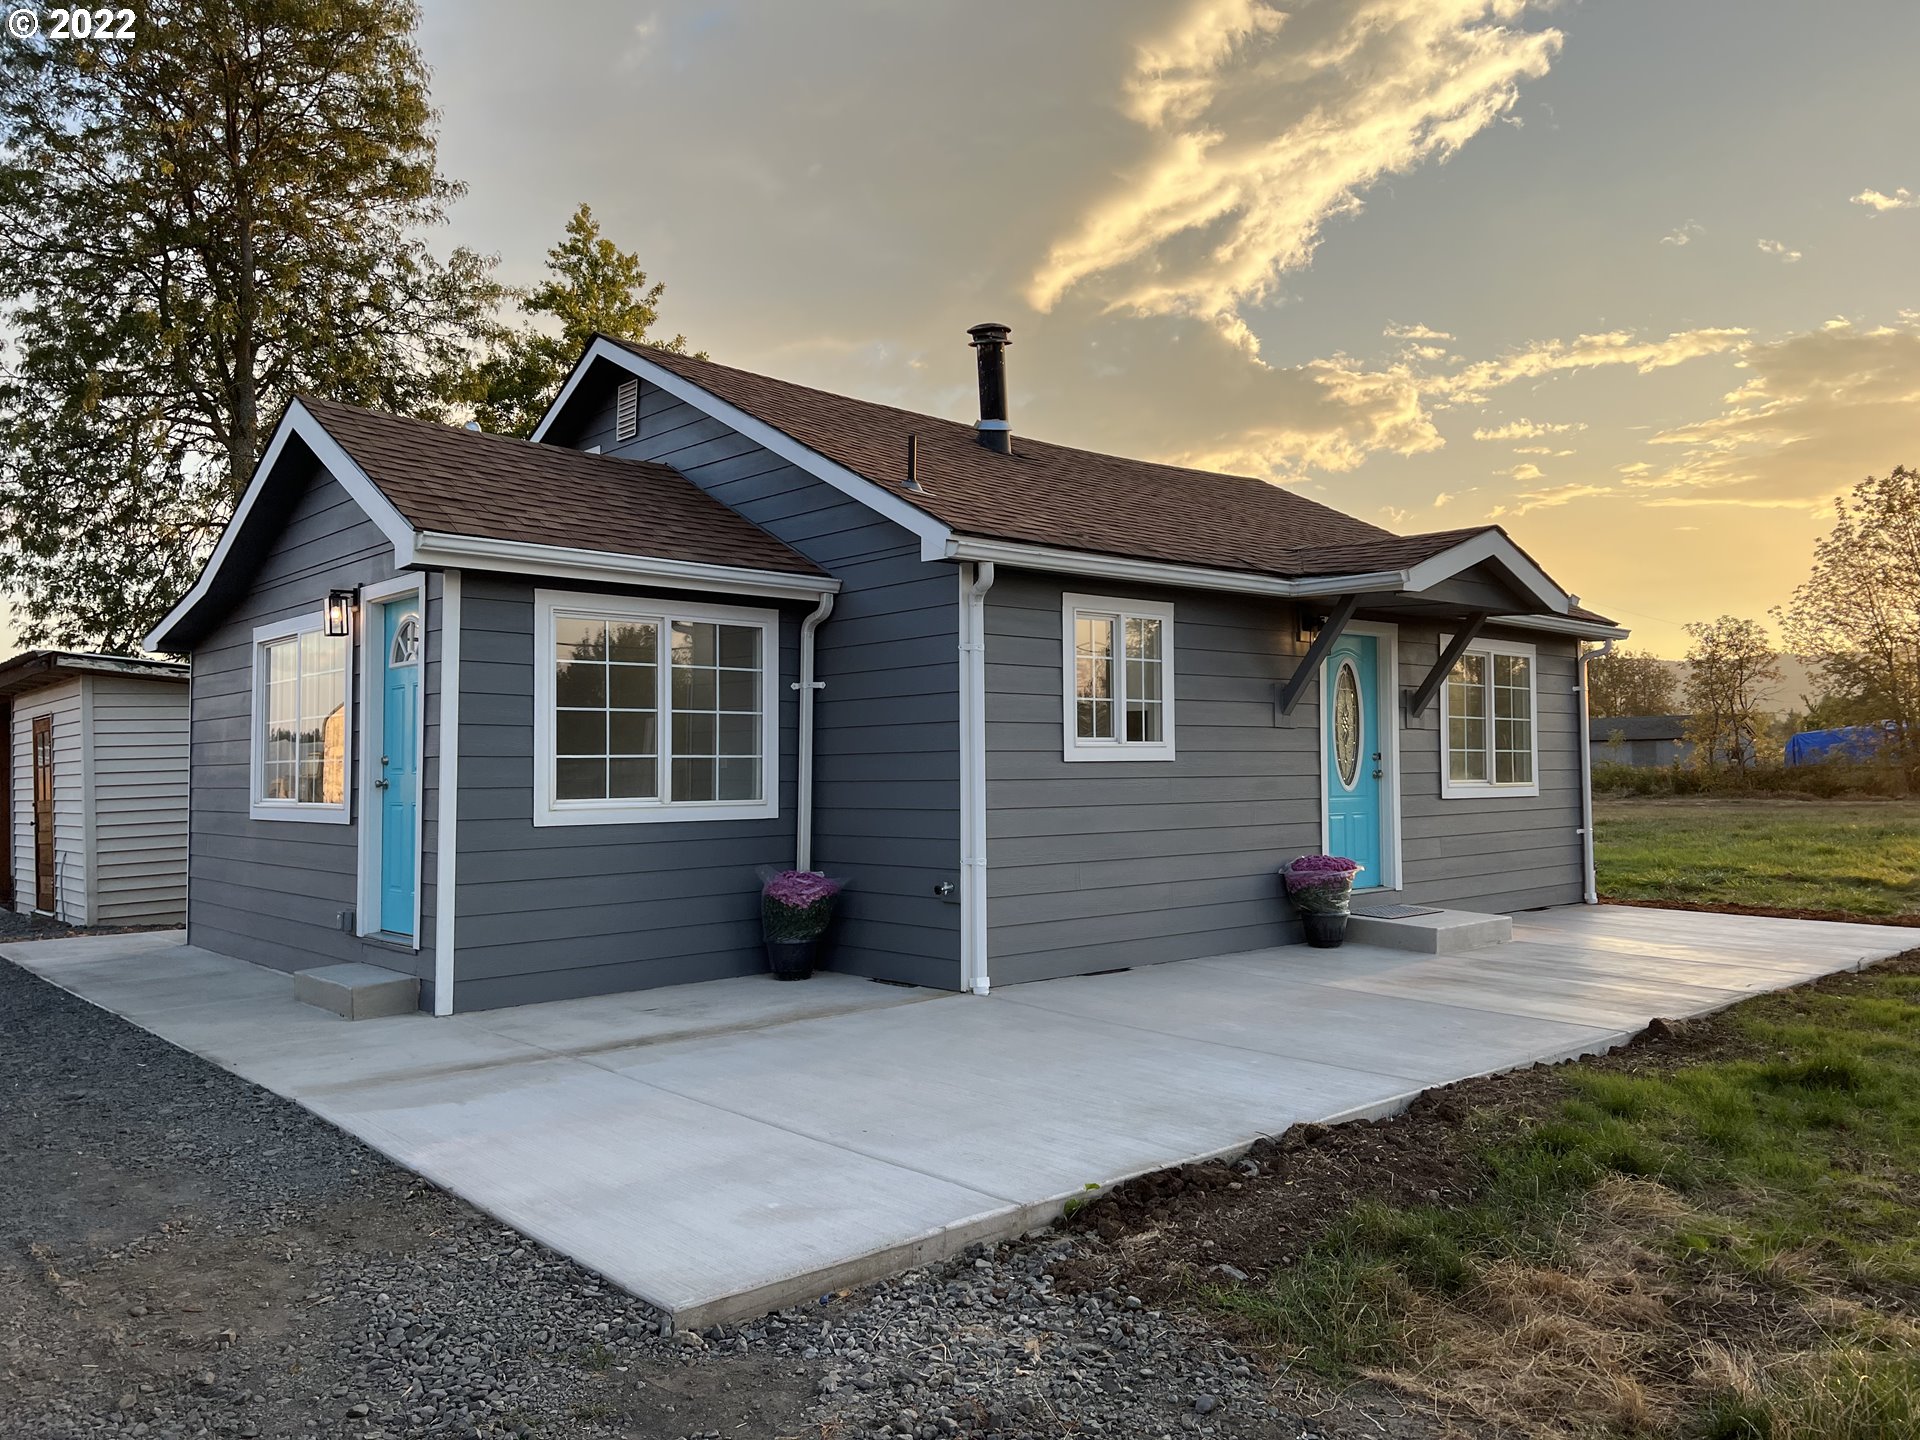 Charming newly renovated 2 bed 1 bath modern farmhouse on fenced in 1.87 acres. Just minutes from the heart of Creswell. Property is buildable for main home. Buyers due diligence.